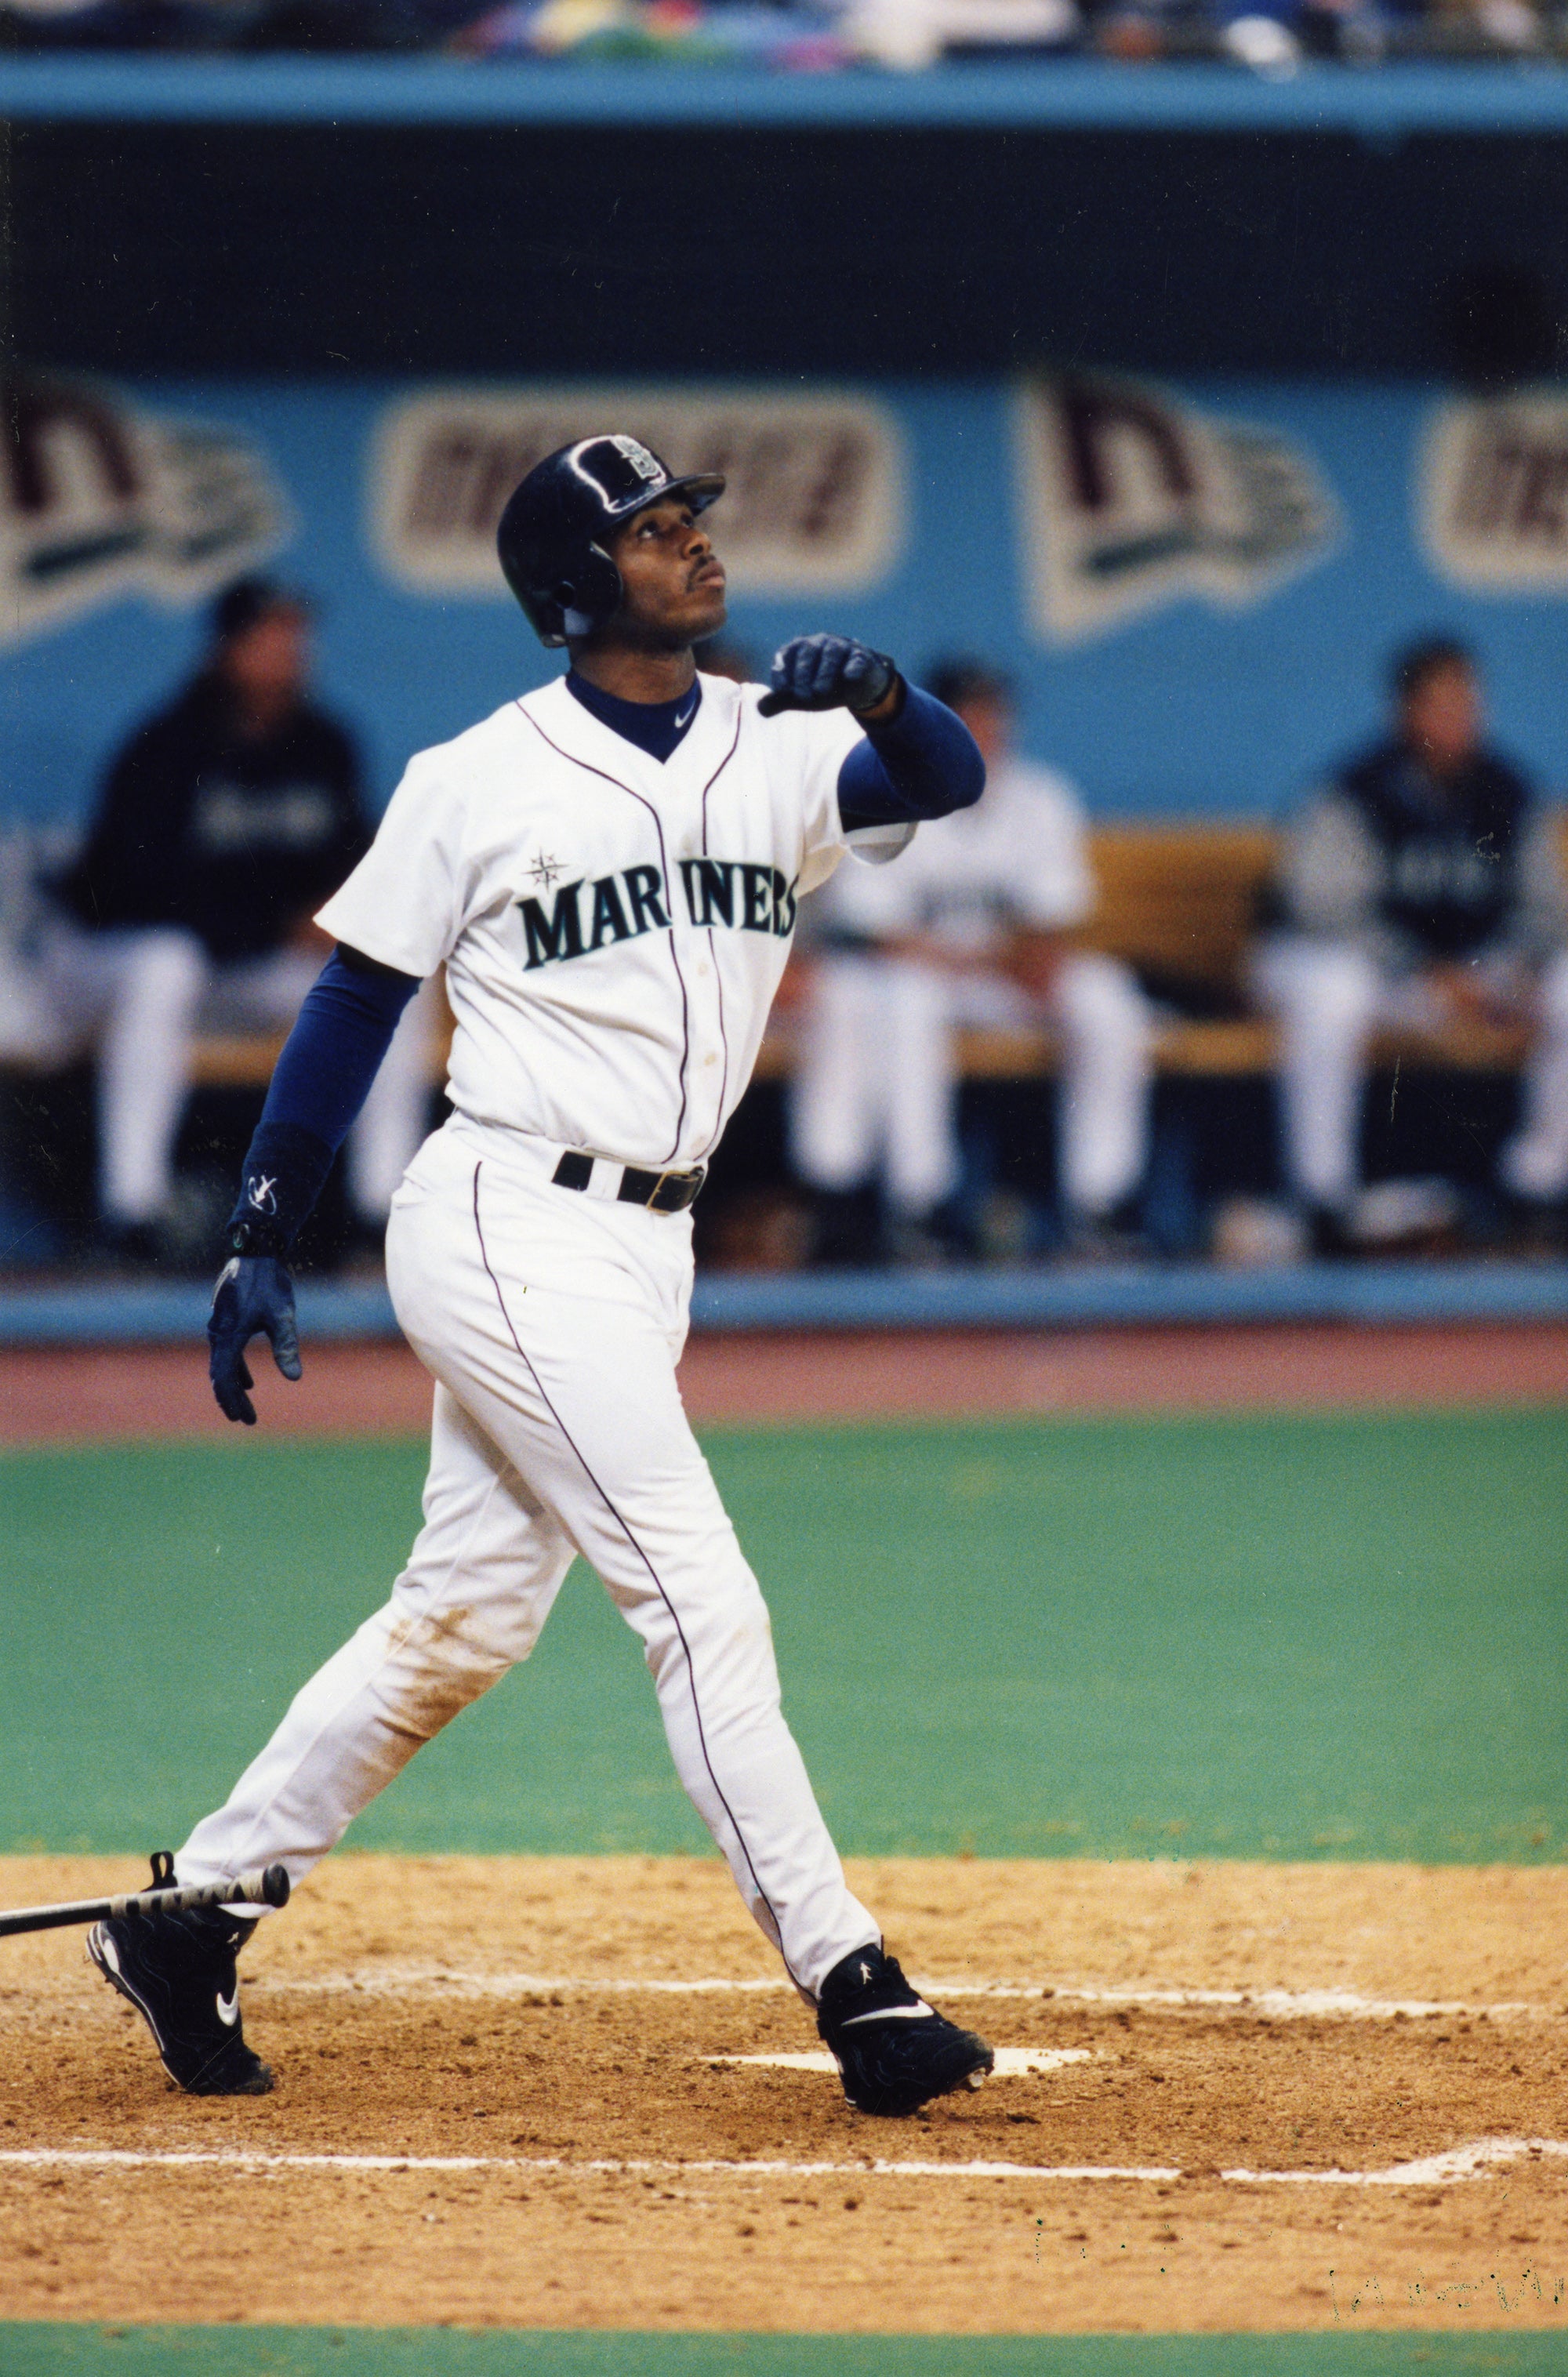 Griffey stars in debut for Mariners